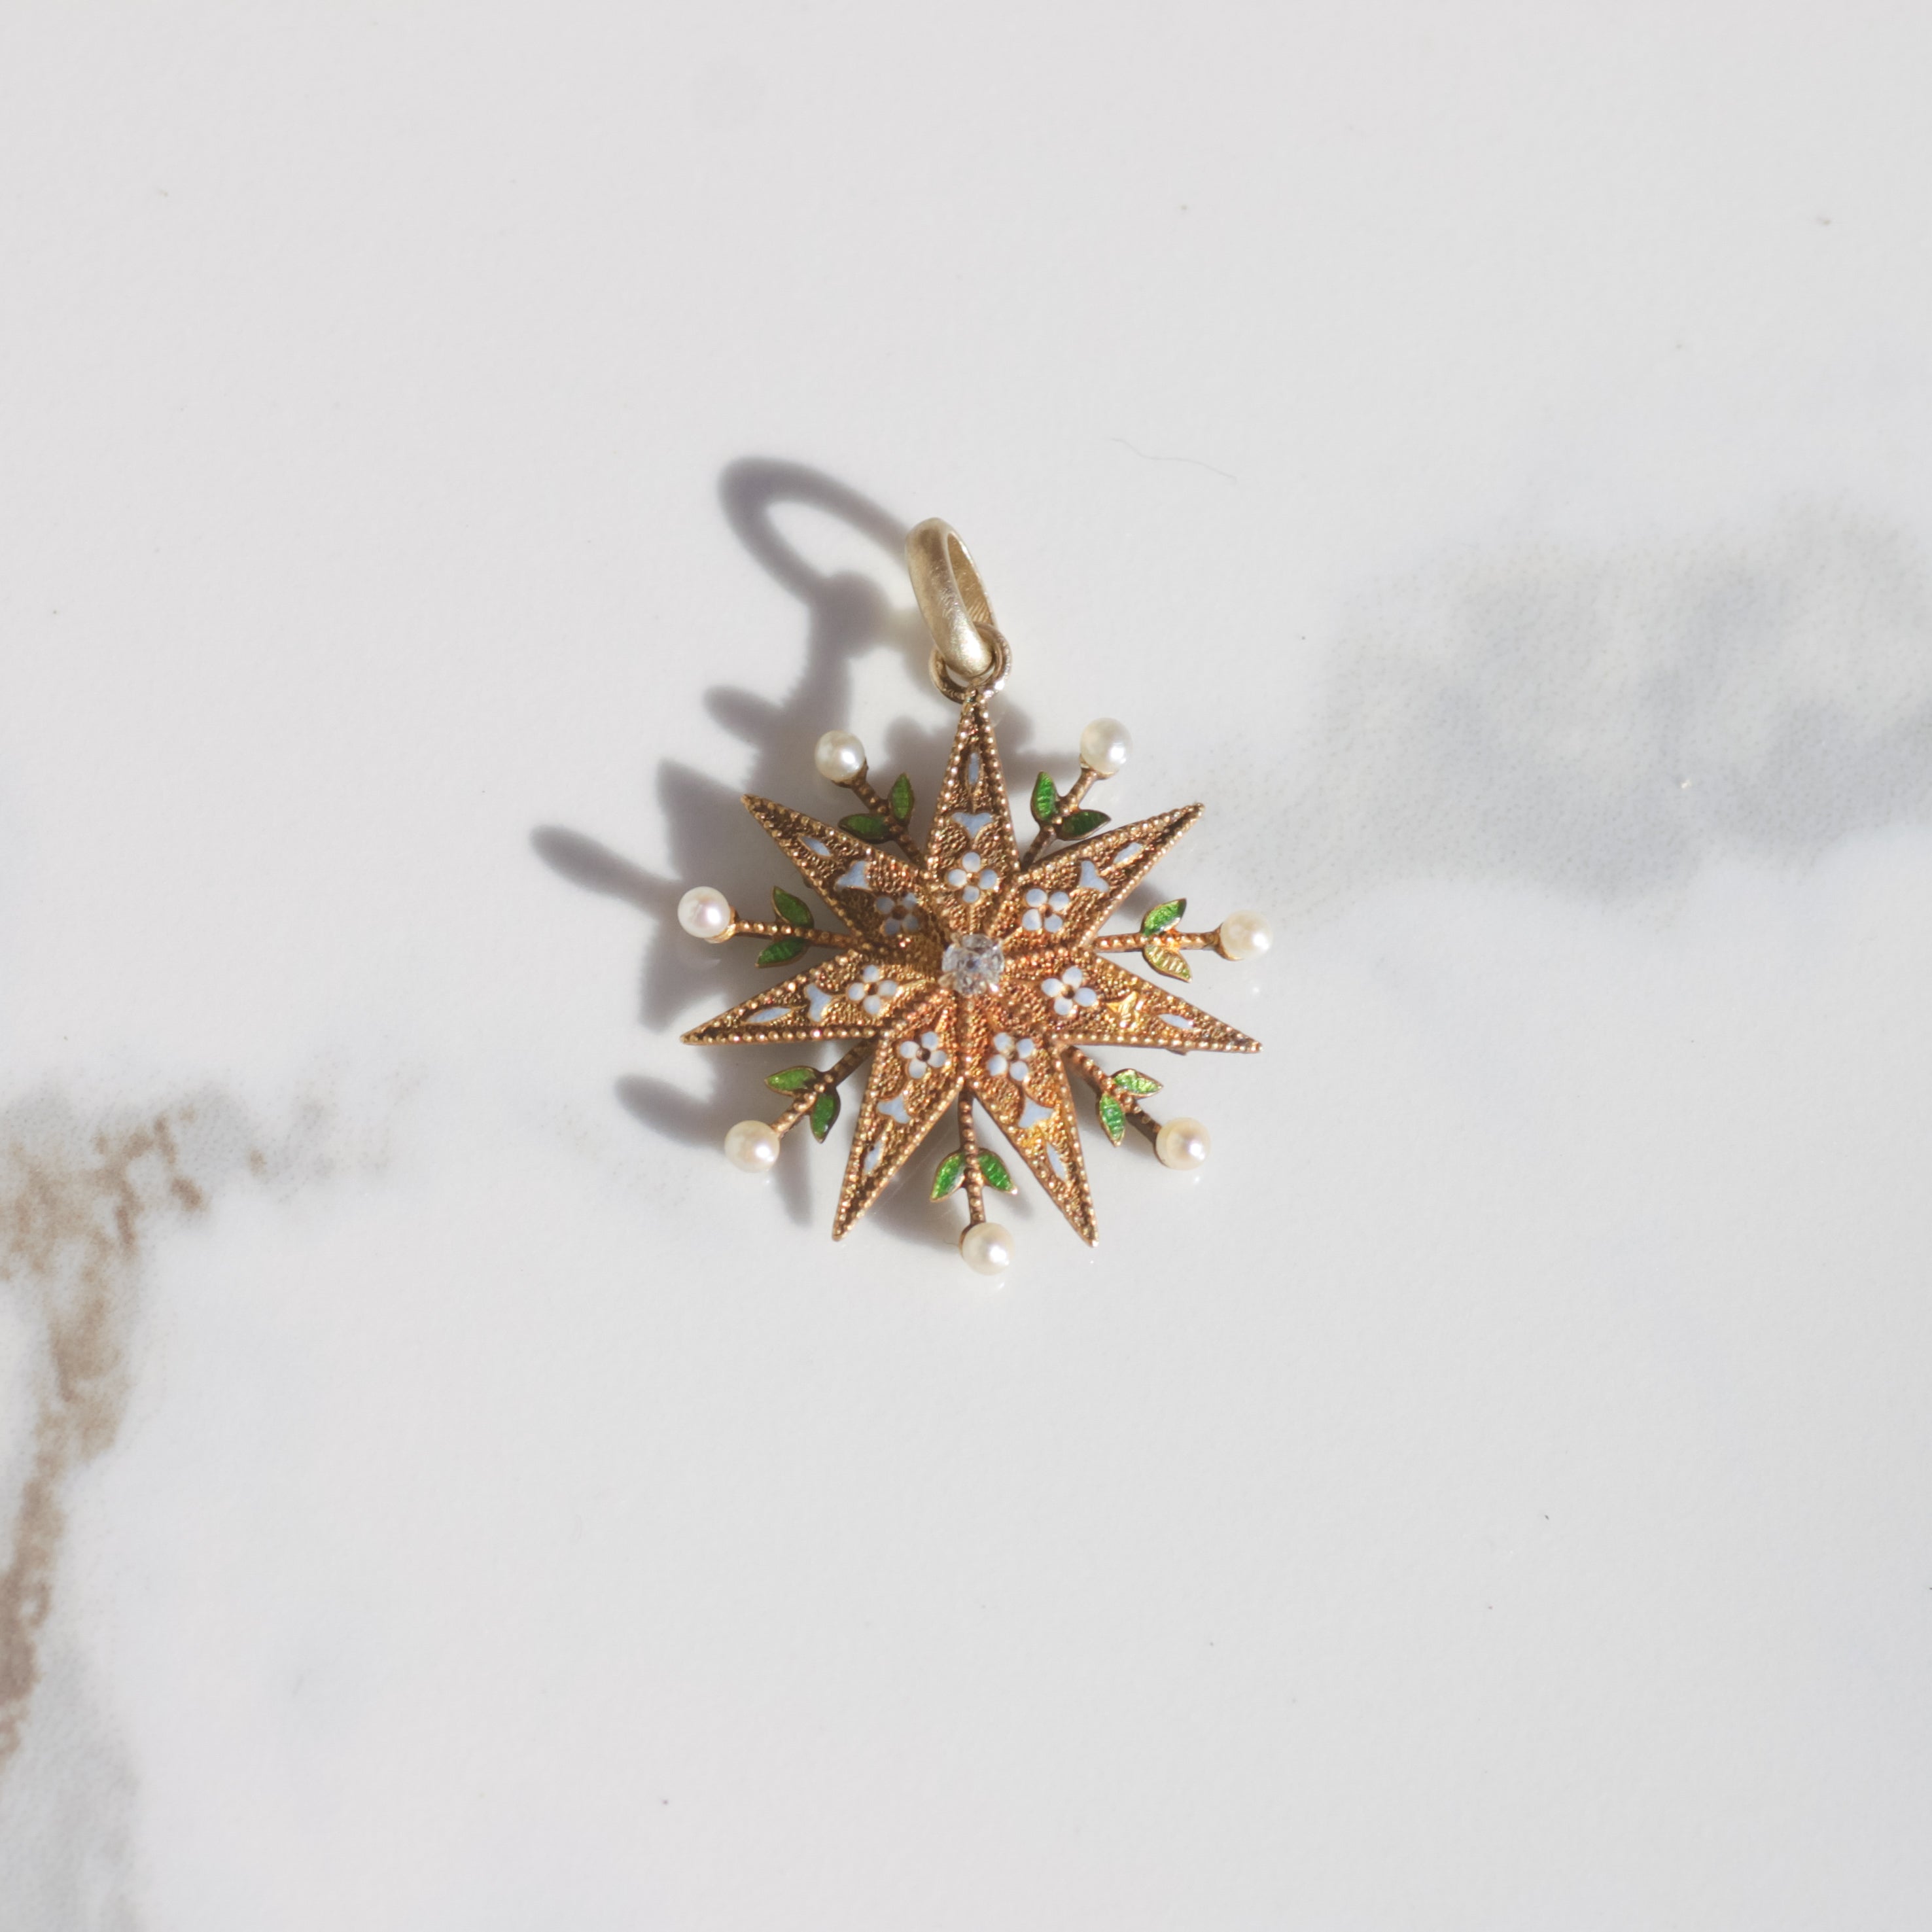 Antique Victorian Starburst Pendant with Diamond and Seed Pearls 14k